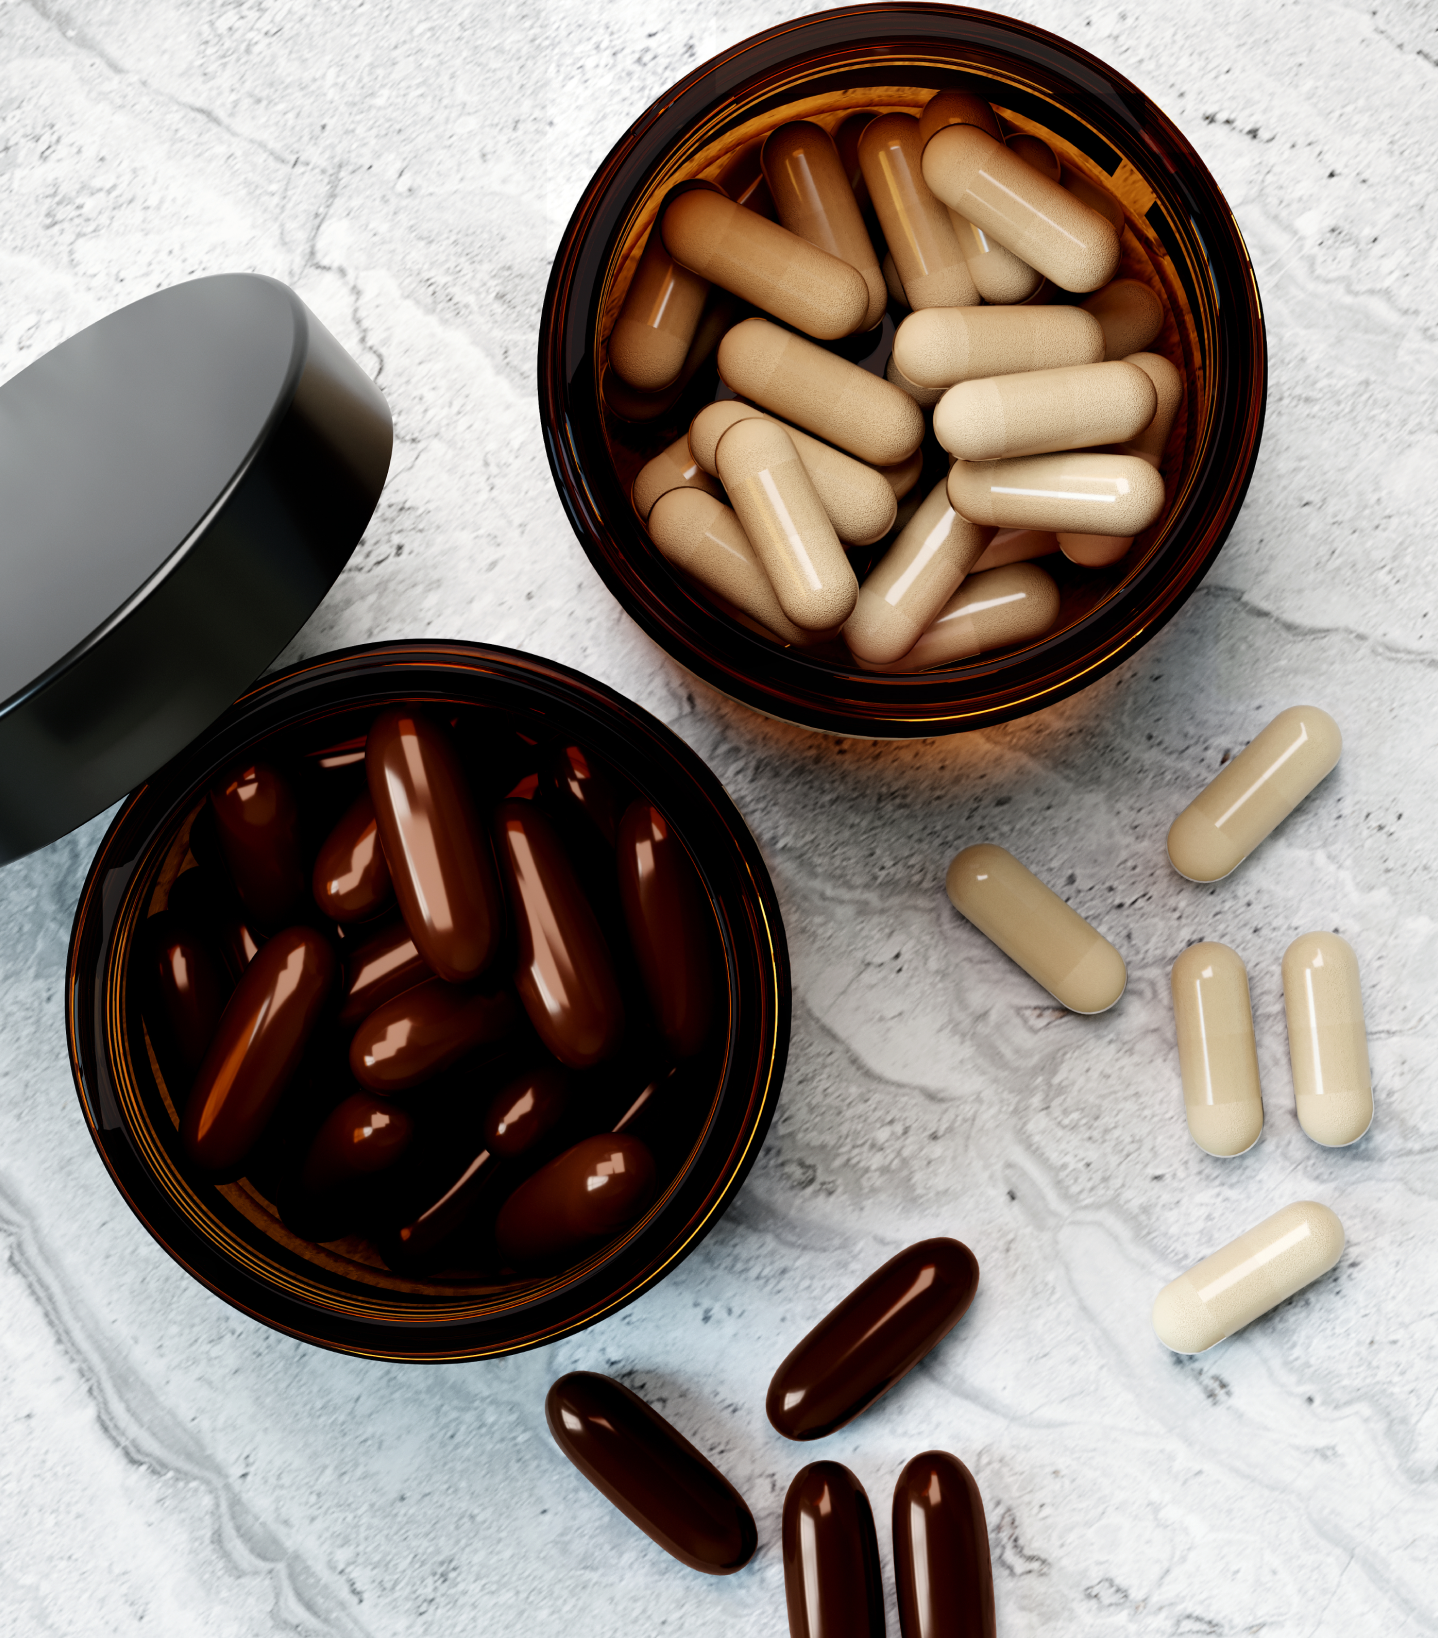 023_BUNDLE_Vitamins_highres_REVISED_1_1_1_07be1299-e25a-4a24-9e63-4b75bc887930.png